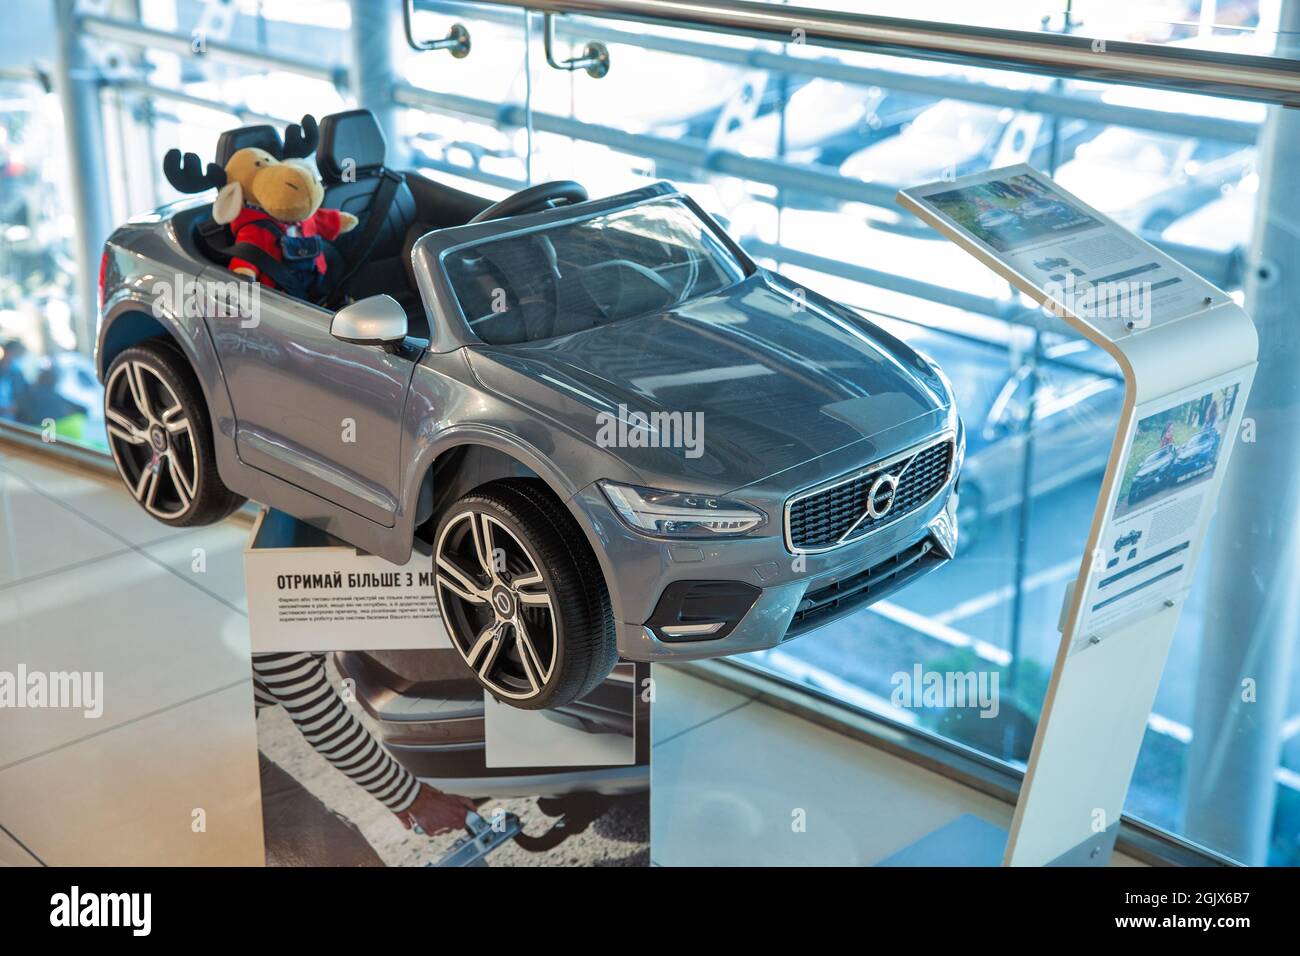 KYIV, UKRAINE - MAY 10, 2021: Baby car Volvo indoors on display in Winner Center dealership company. The Volvo Group is a Swedish multinational manufa Stock Photo